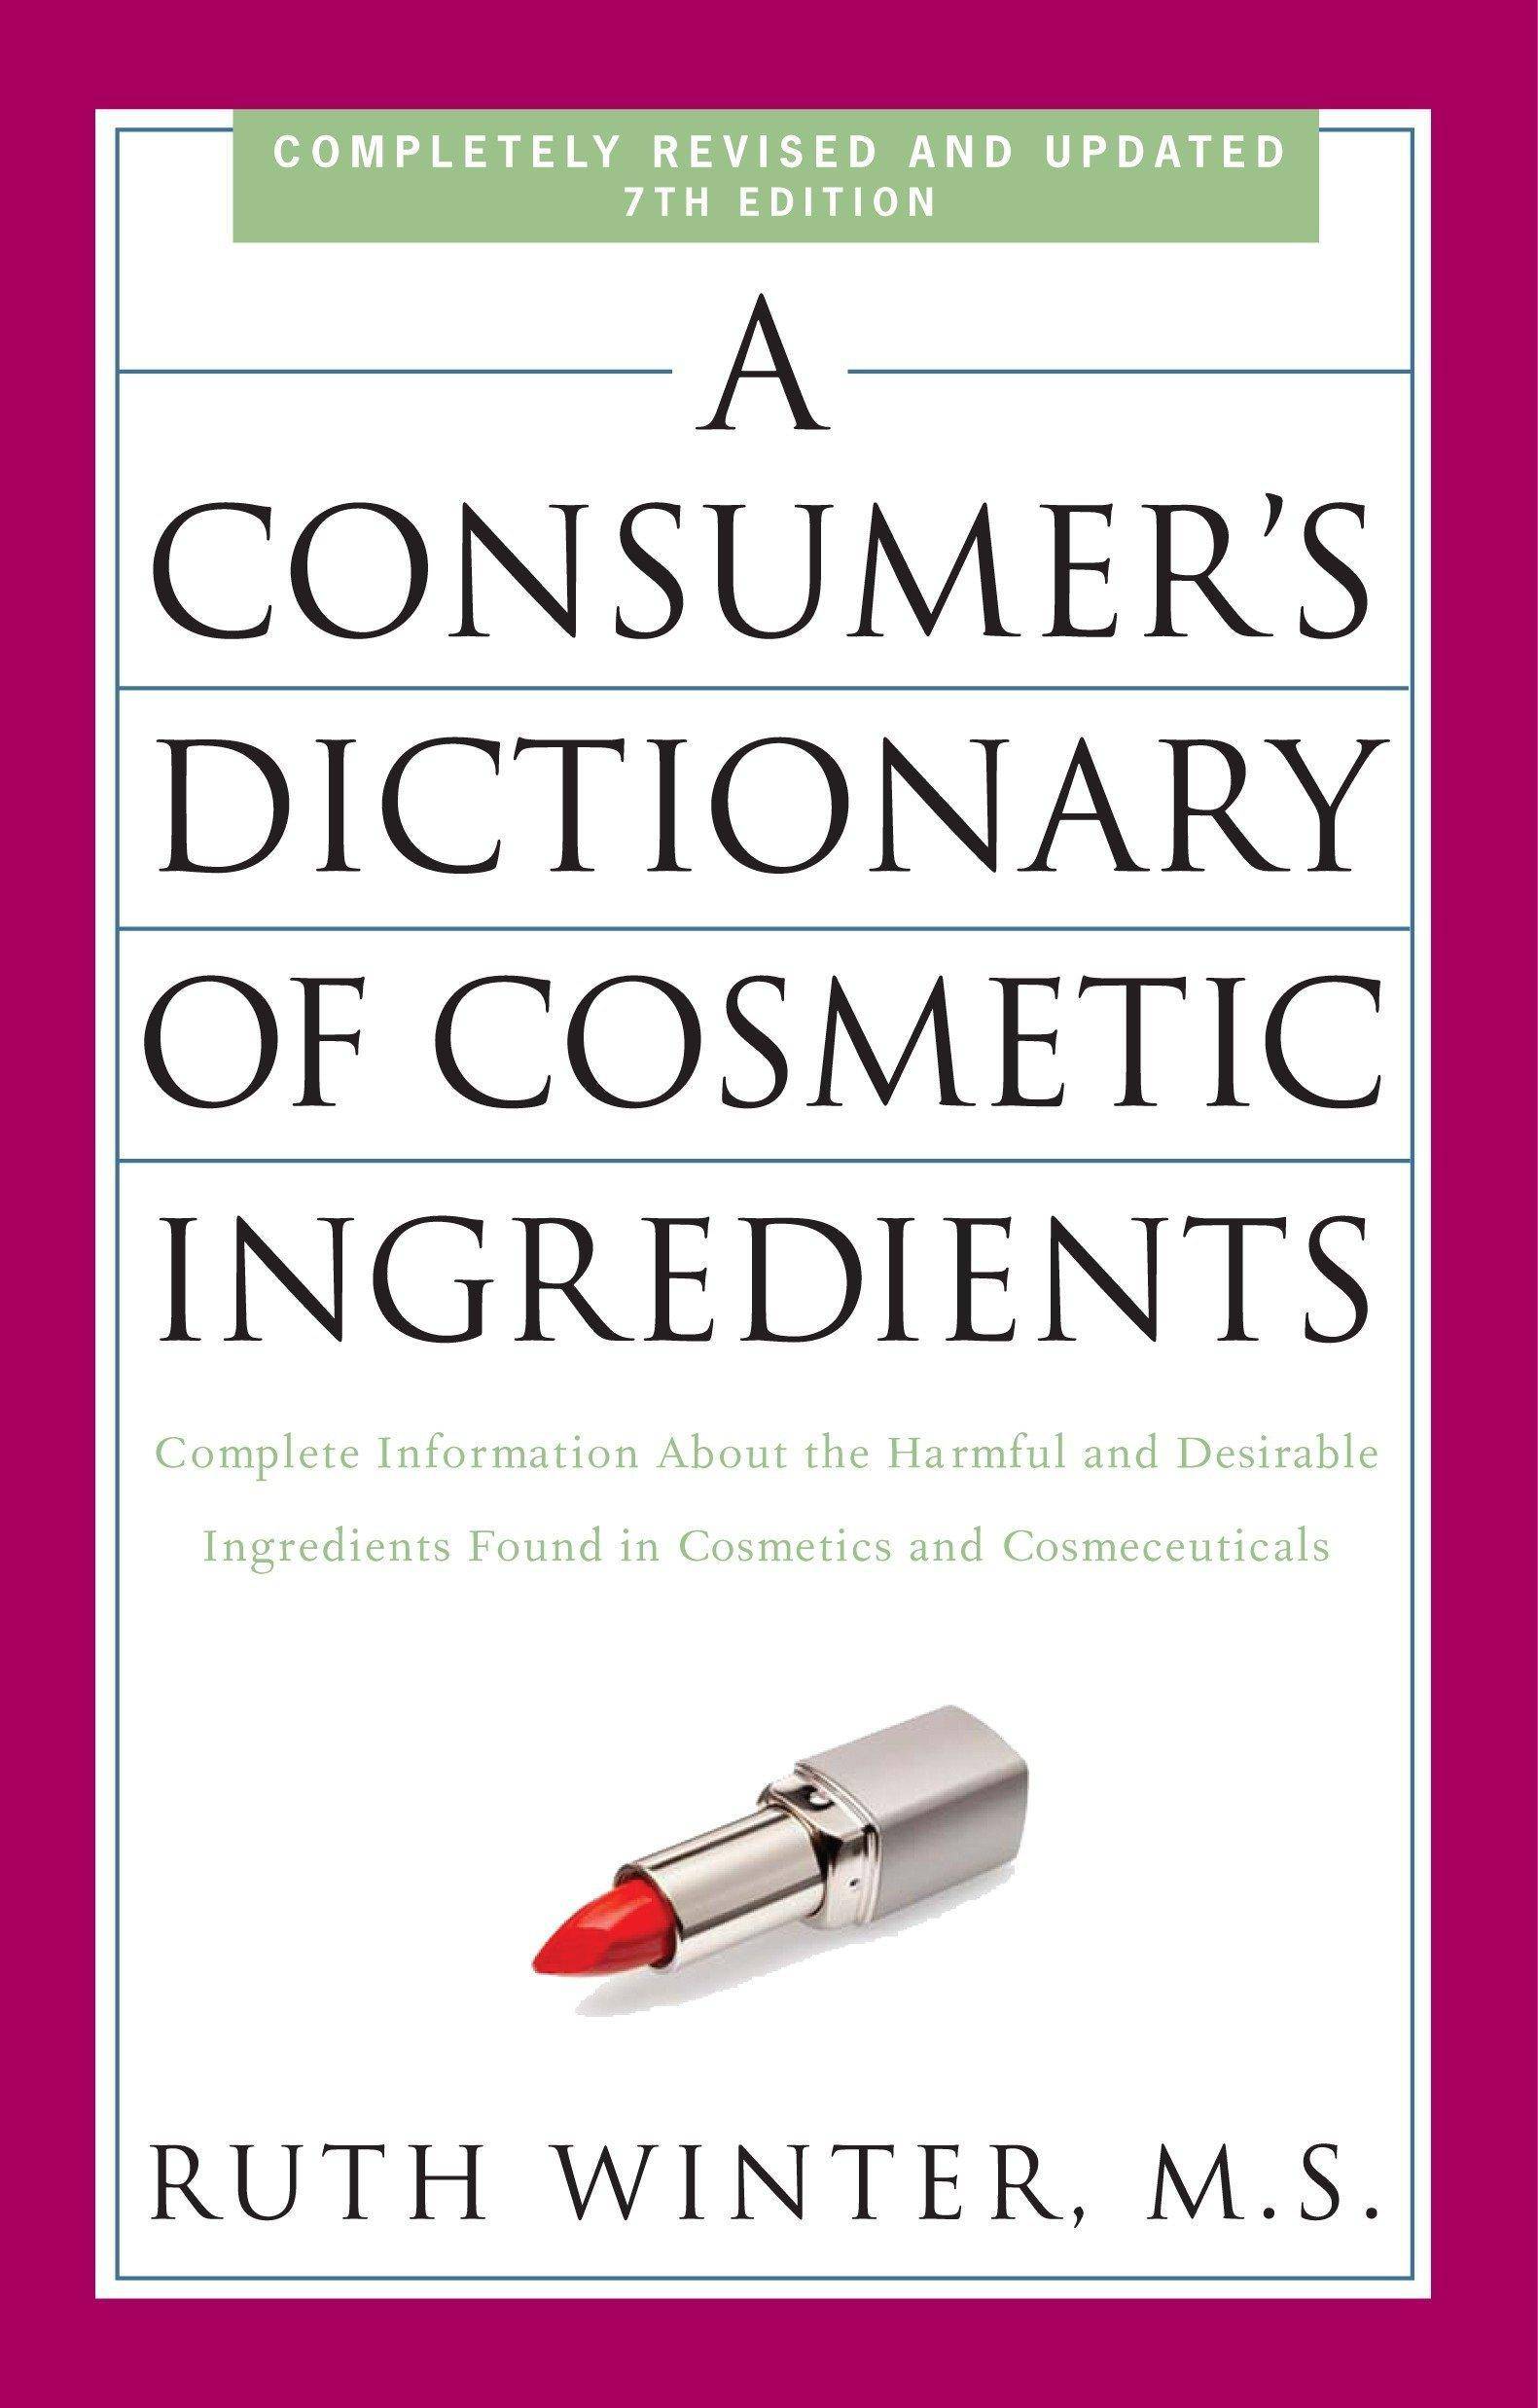 A Consumer's Dictionary of Cosmetic Ingredients, 7th Edition - SureShot Books Publishing LLC